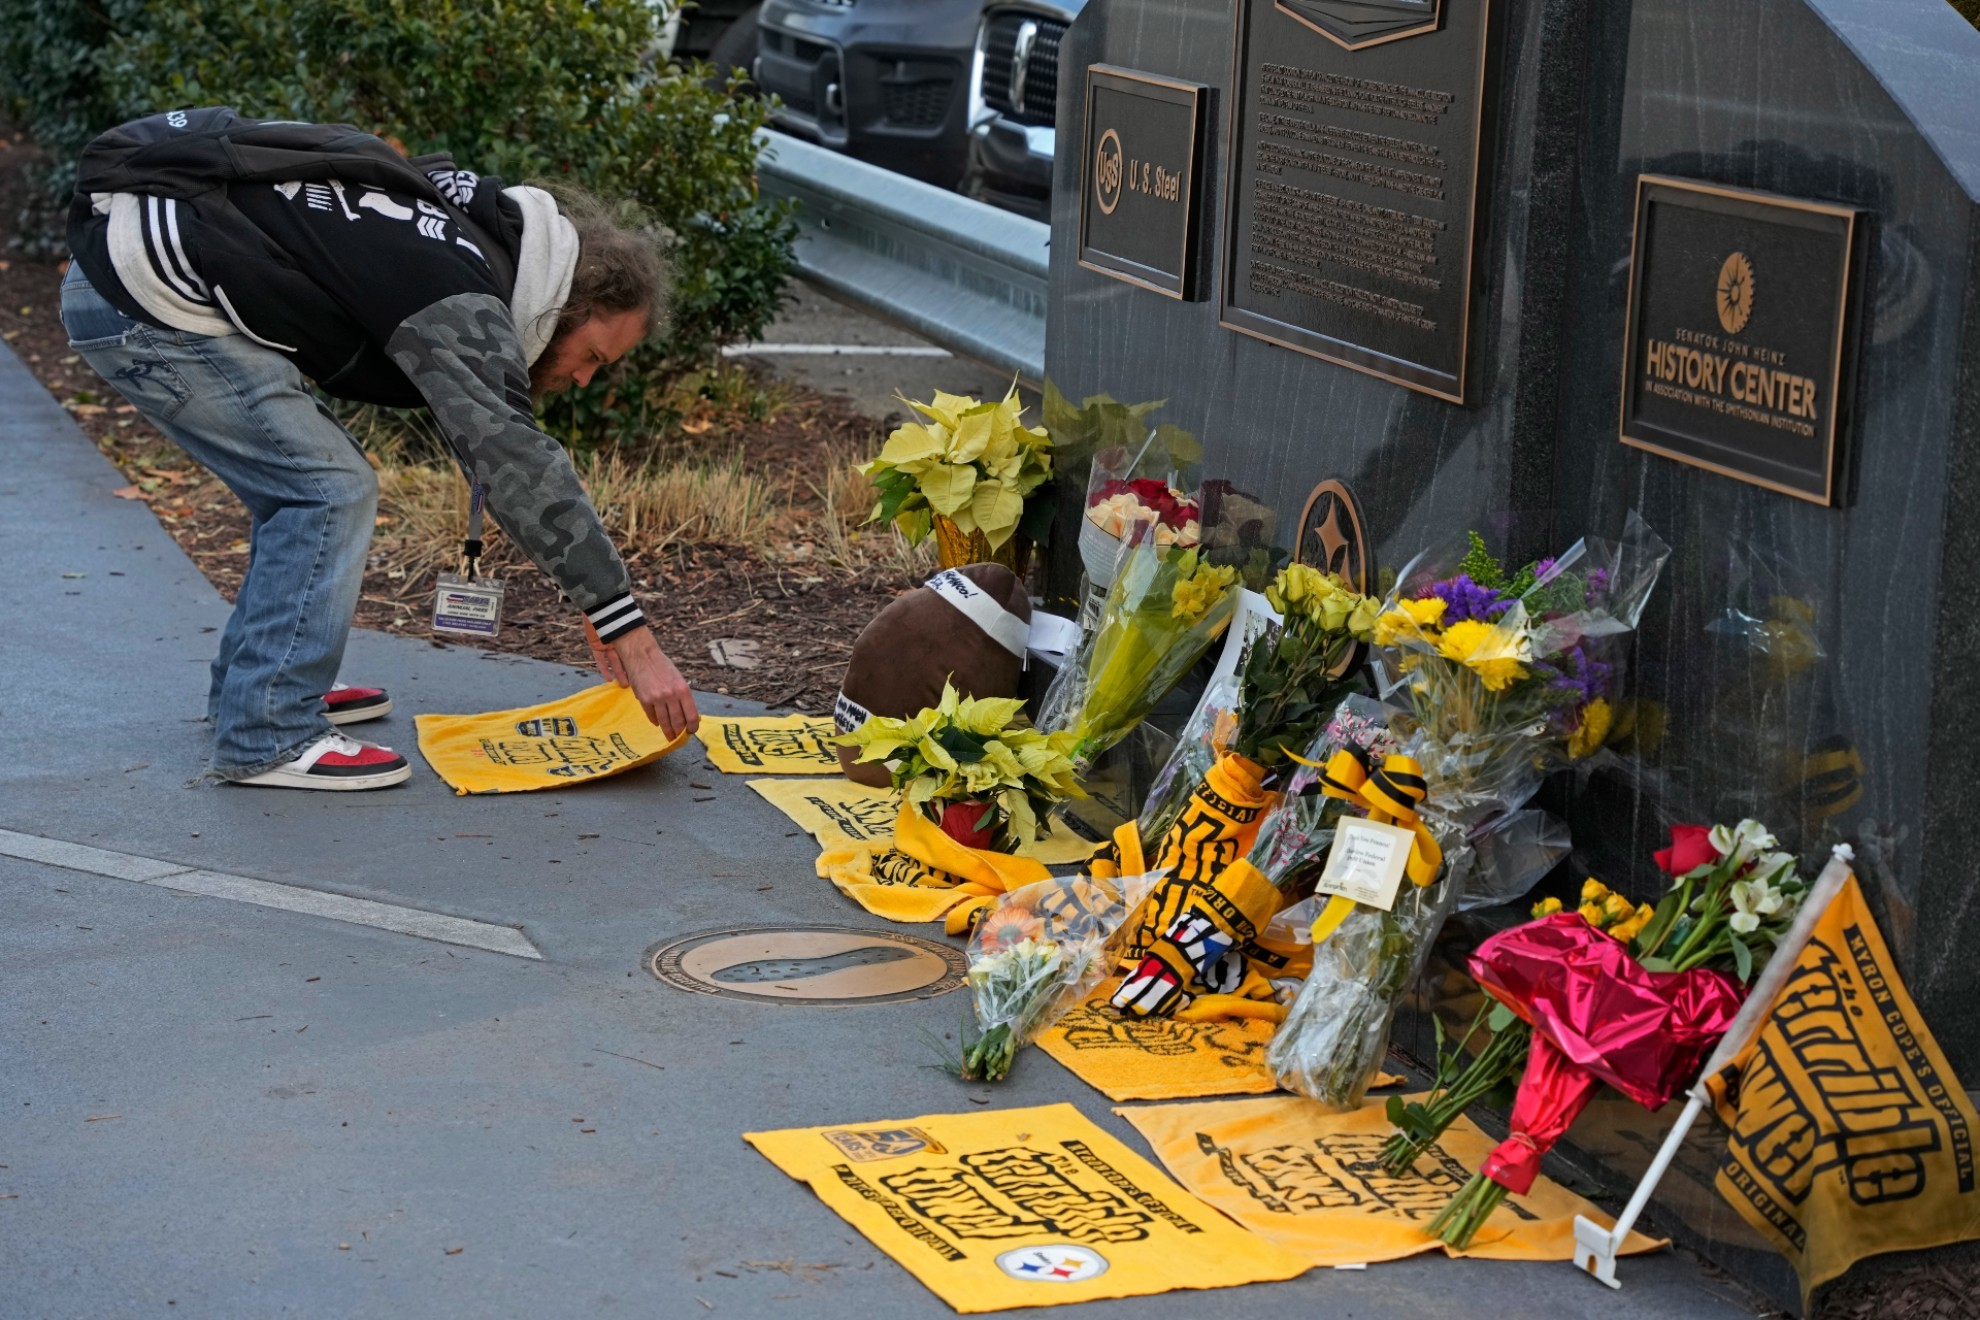 Steelers' fans mourns John Rooney and Franco Harris deaths.